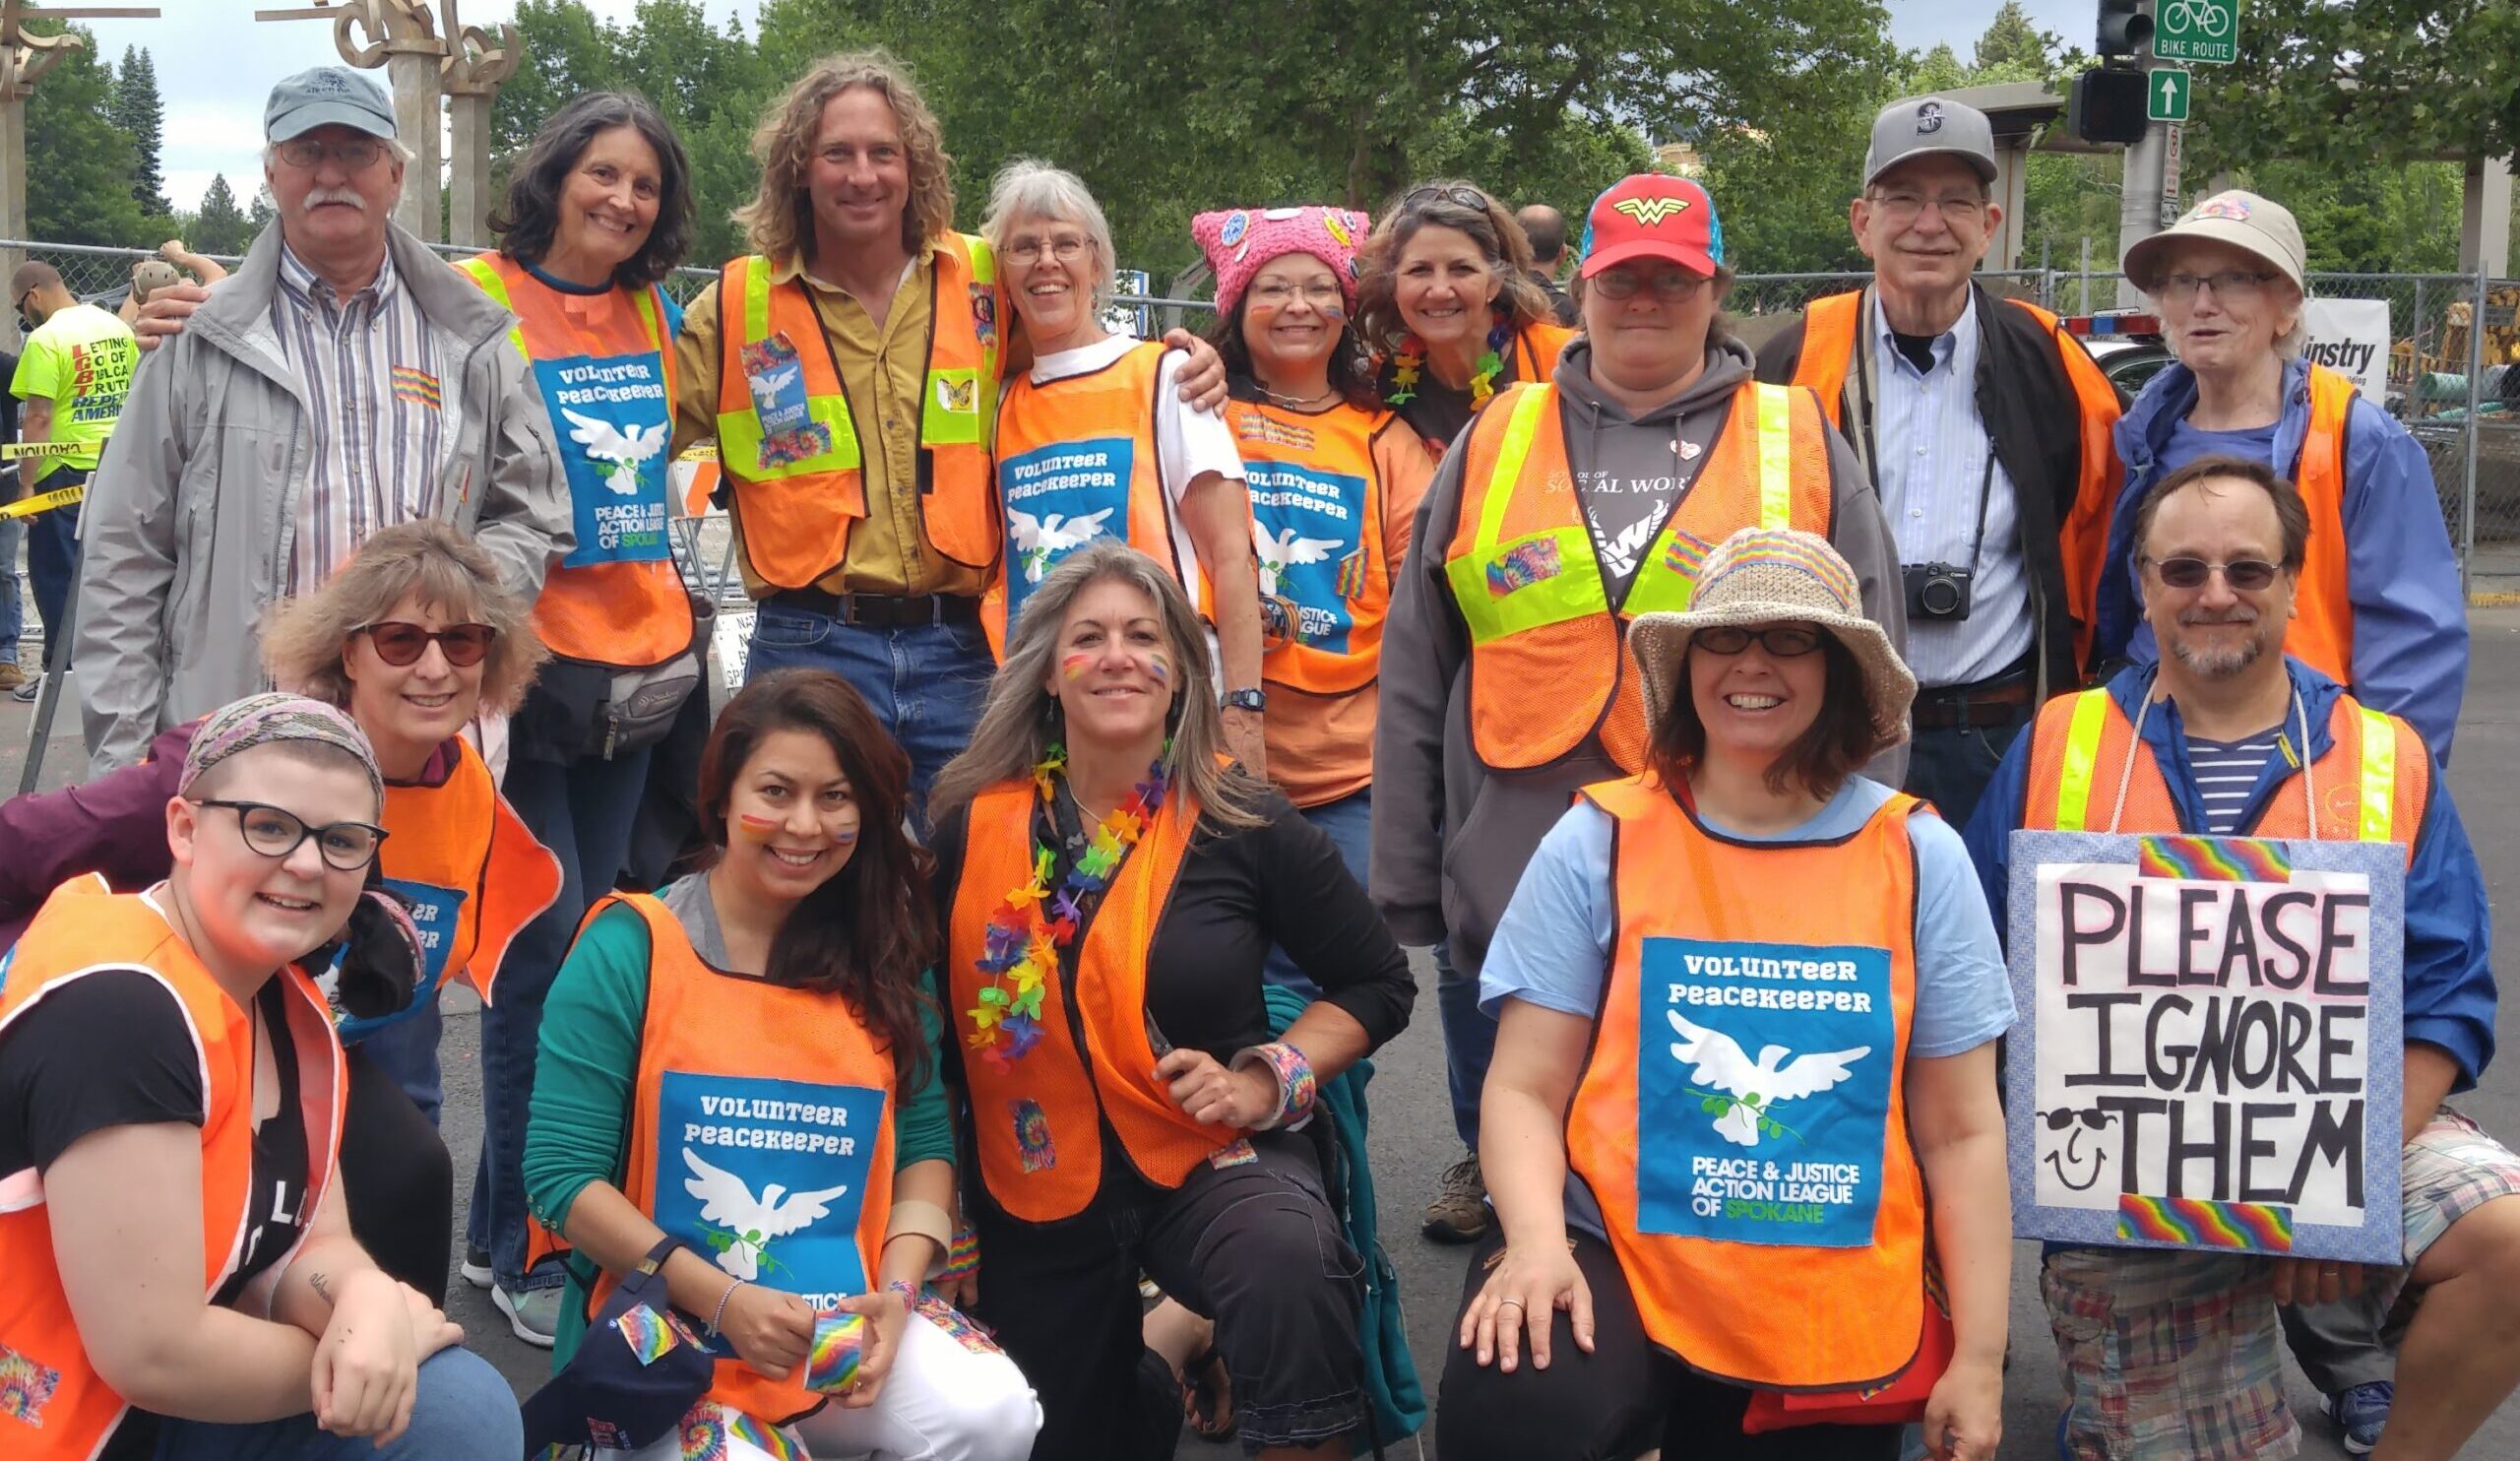 Photo of a group of 15 people wearing bright orange vests with a blue logo that reads "Peace and Justice Action League Peacekeepers"